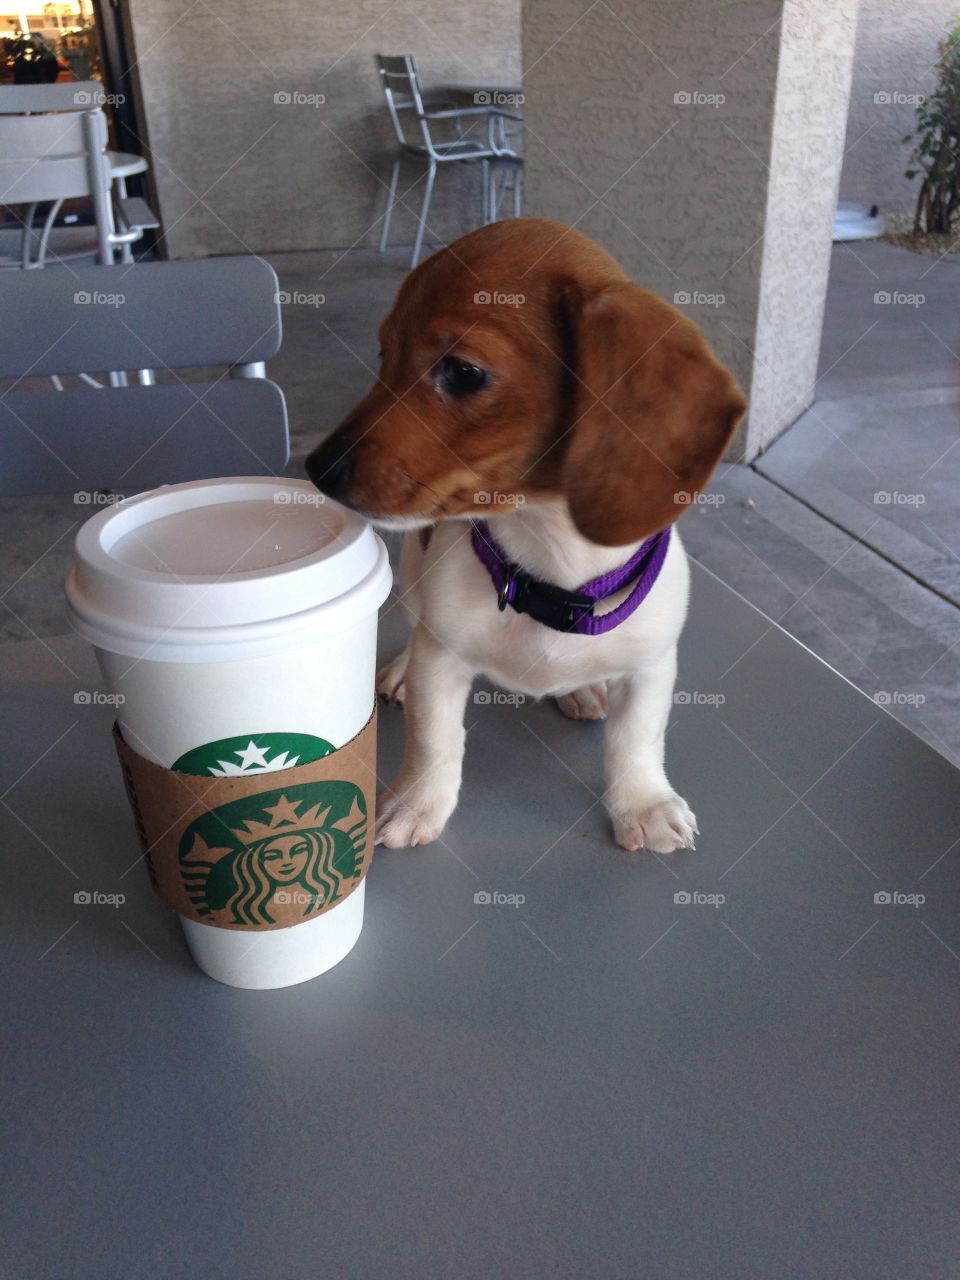 Puppy is as big as a grande!